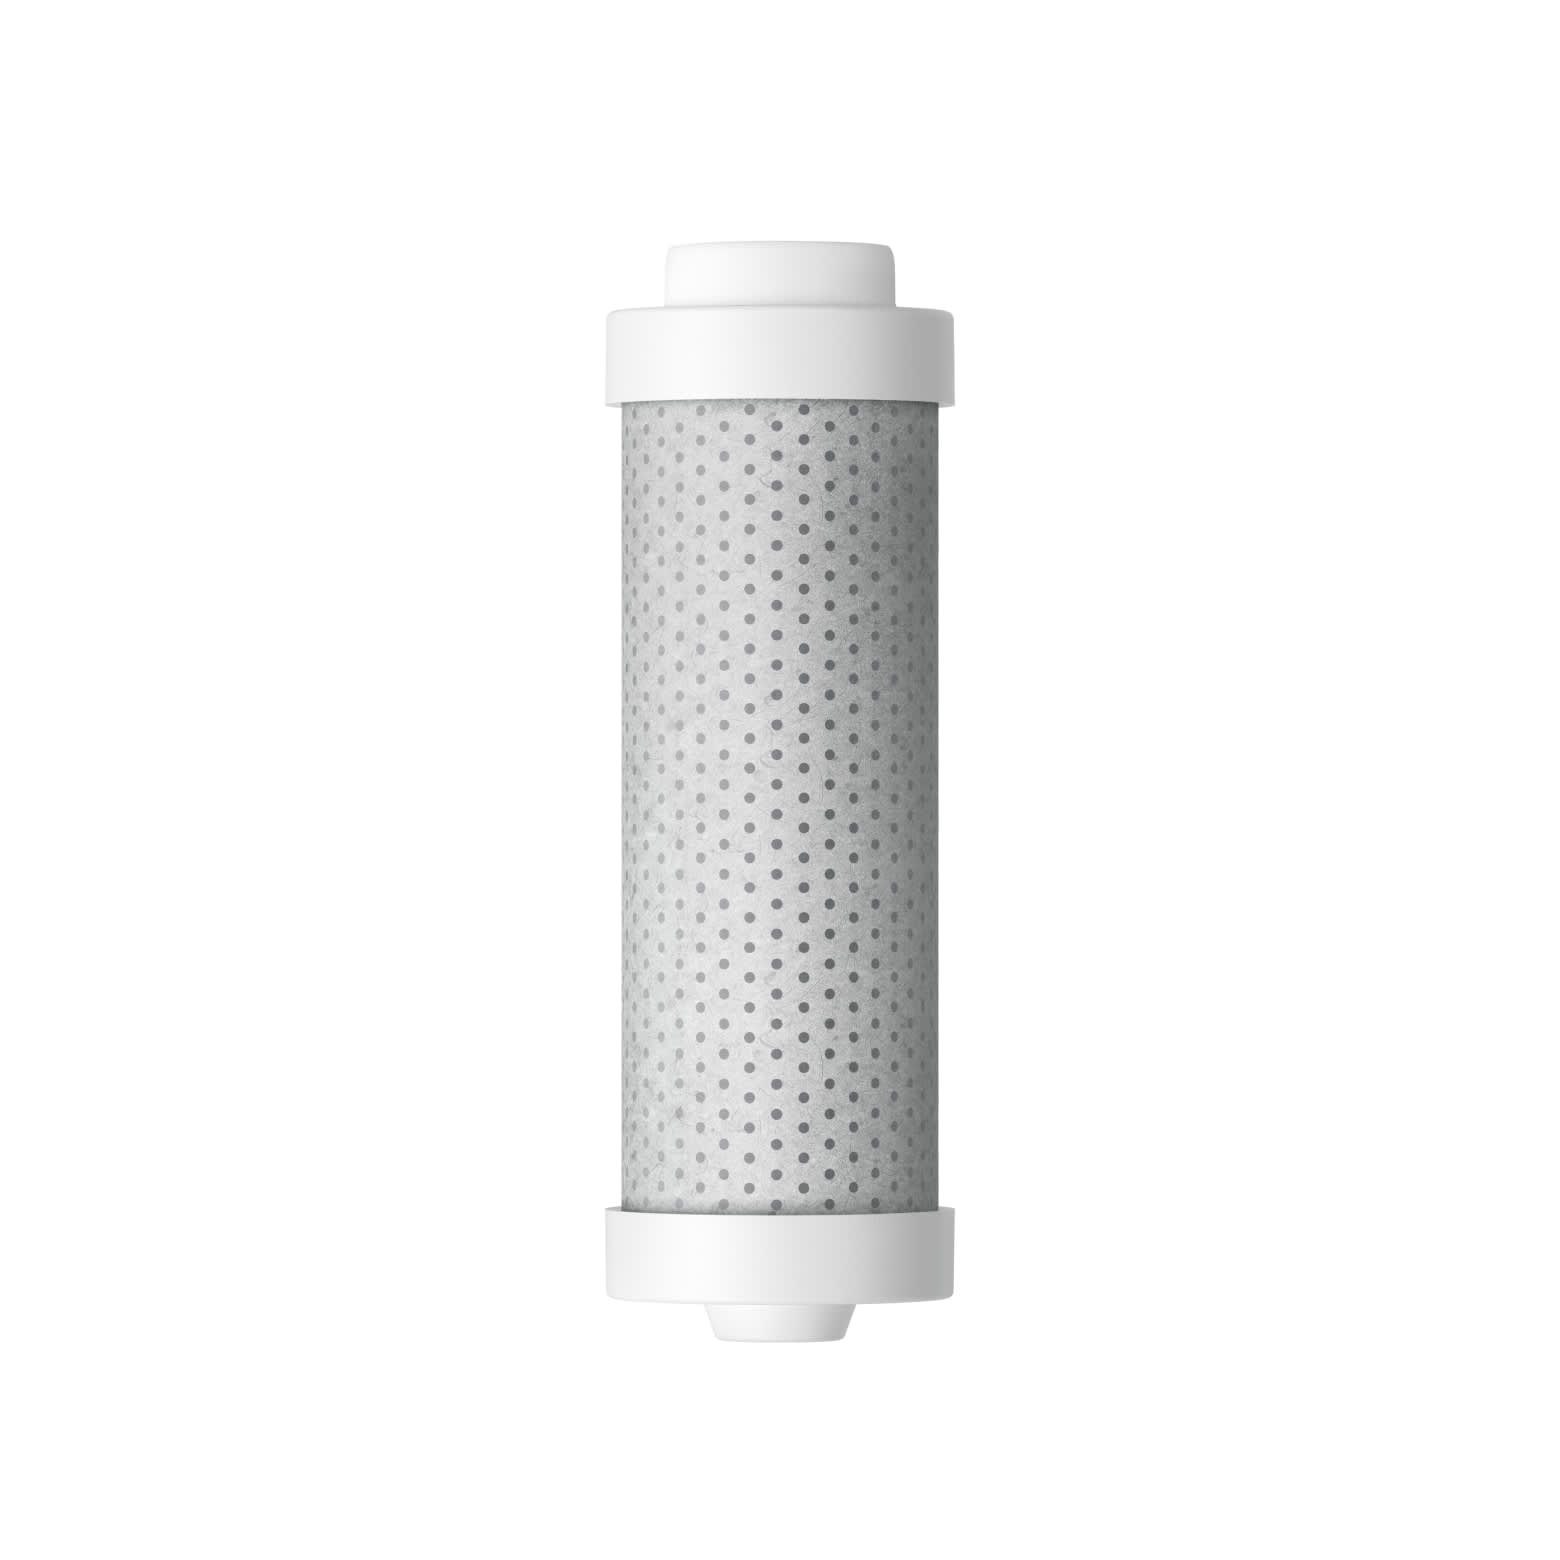 1x Bottle Filtered Replacement Filter